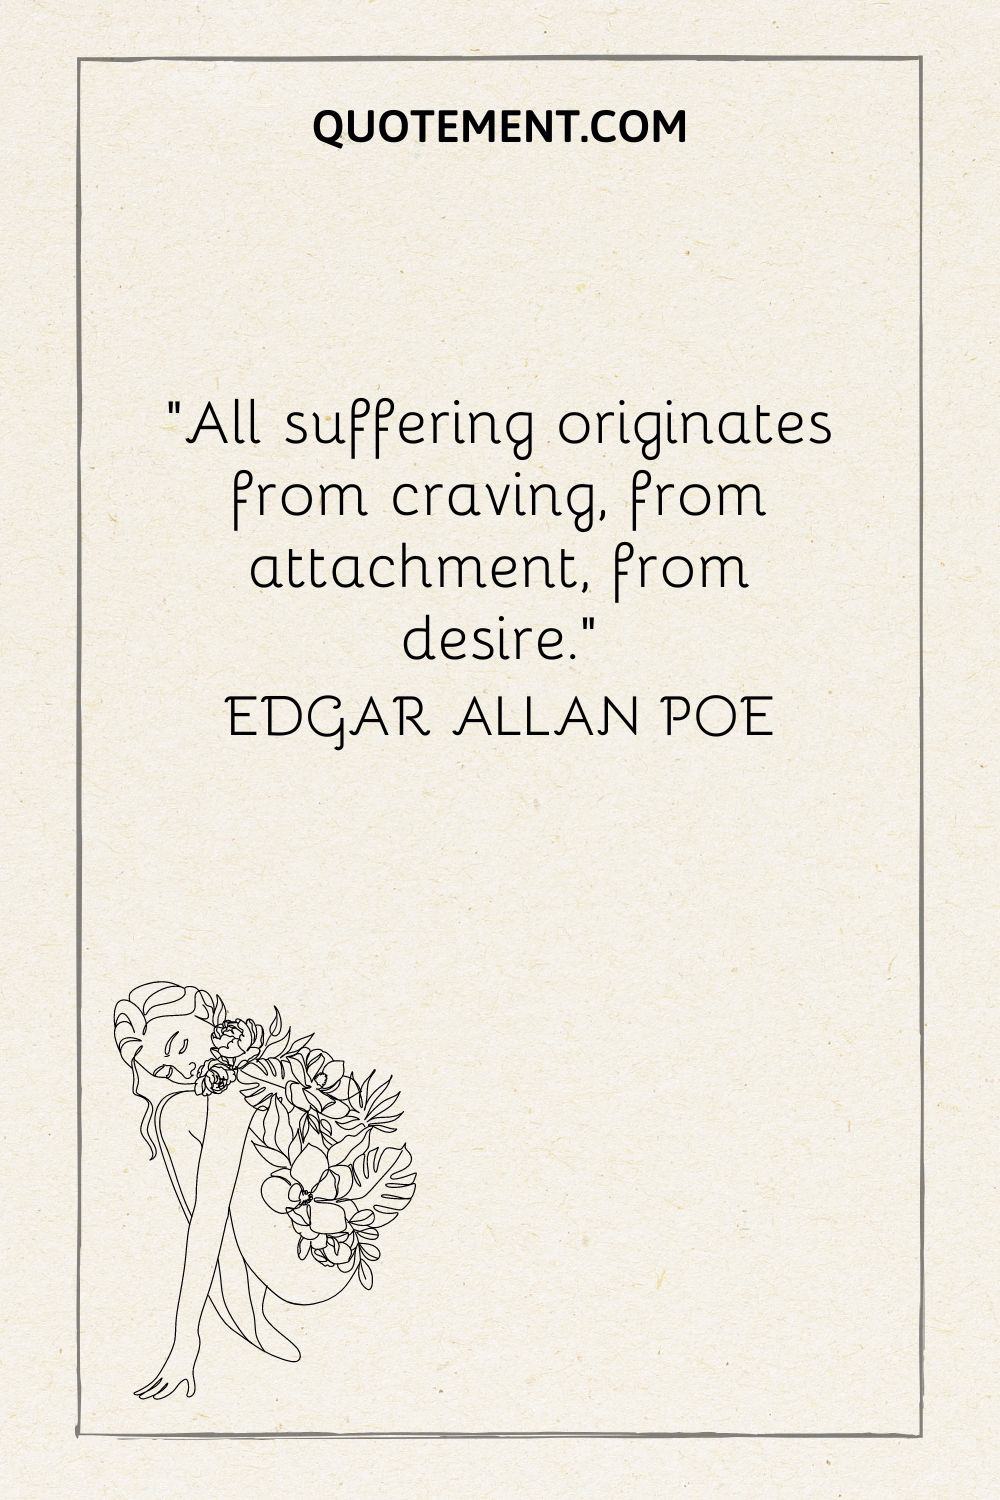 “All suffering originates from craving, from attachment, from desire.” — Edgar Allan Poe